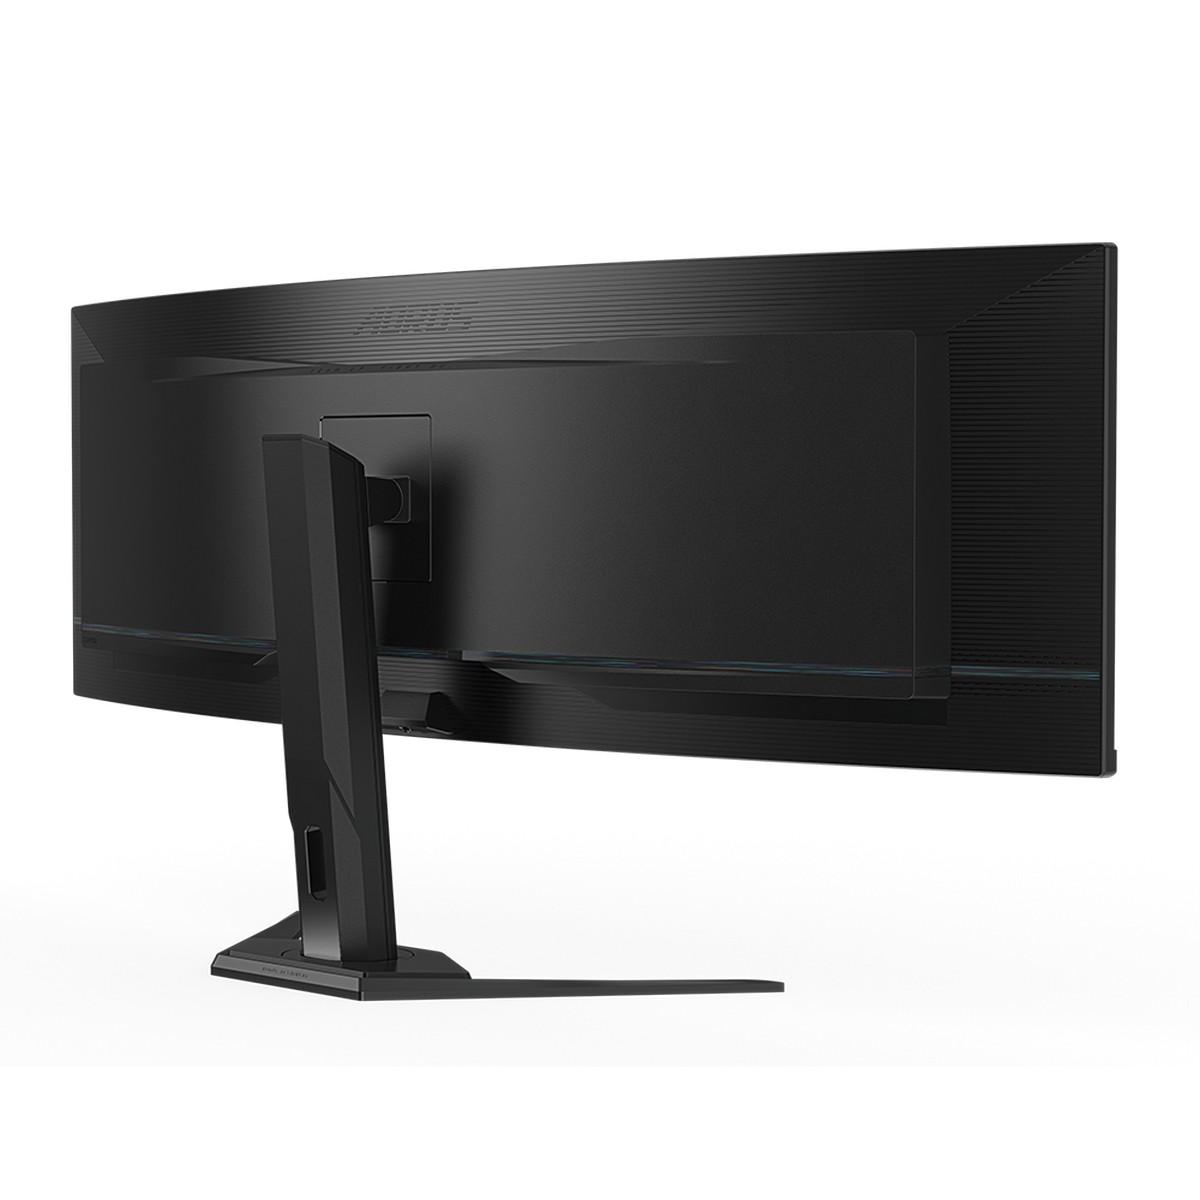 Gigabyte - Gigabyte 49" CO49DQ 5120x1440 OLED 144Hz 0.03ms HDMI 2.1 Ultrawide Curved Gaming Monitor